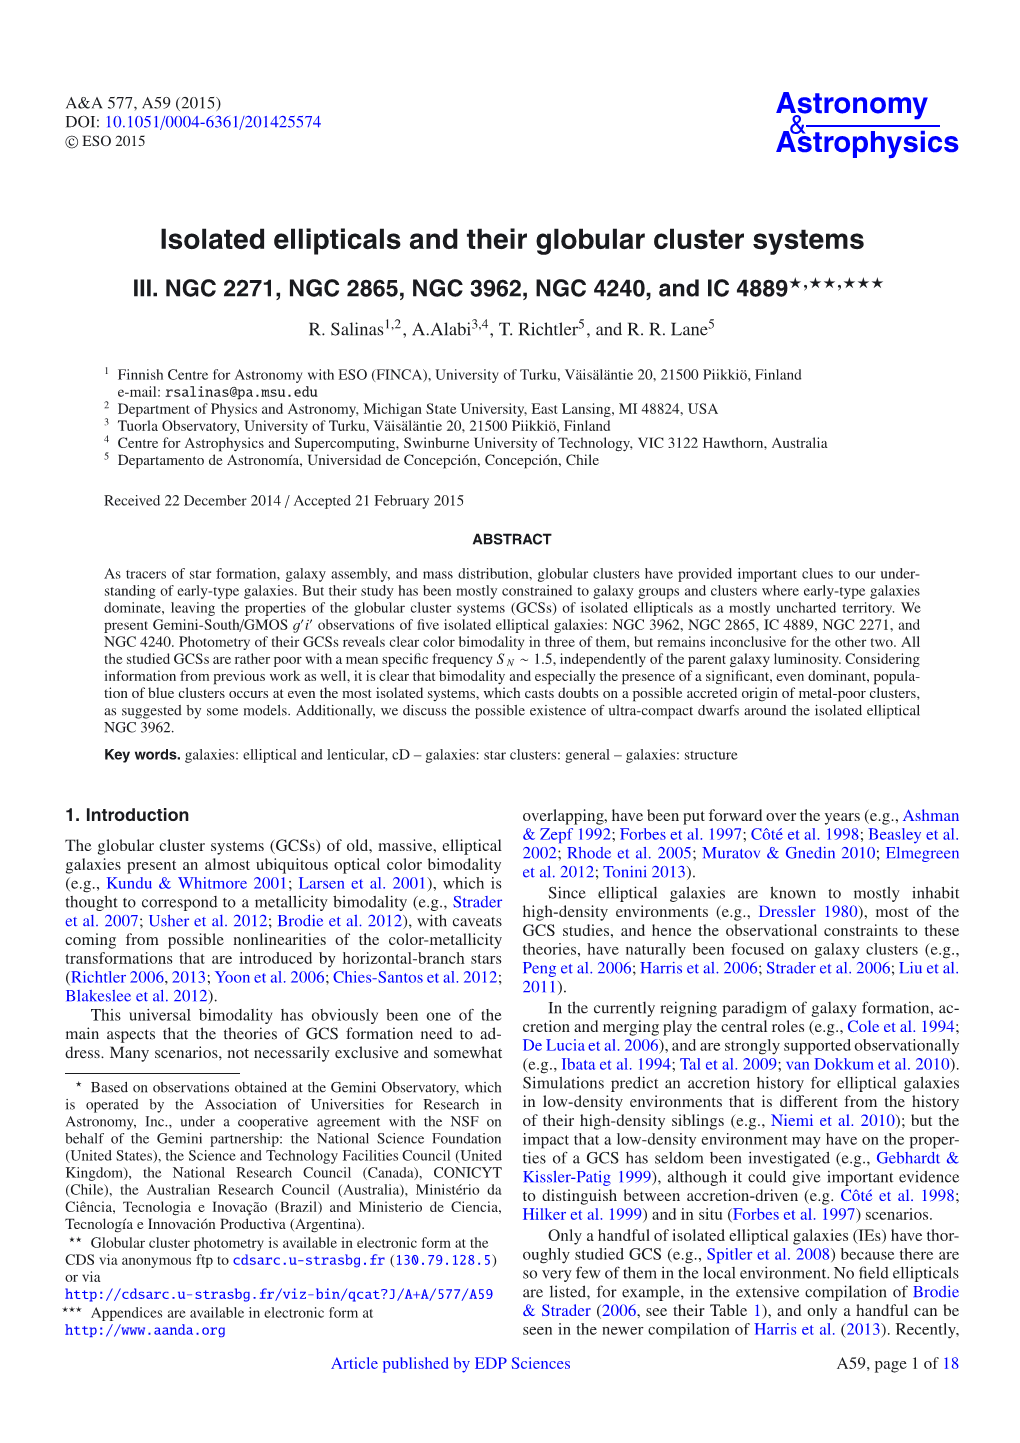 Isolated Ellipticals and Their Globular Cluster Systems III